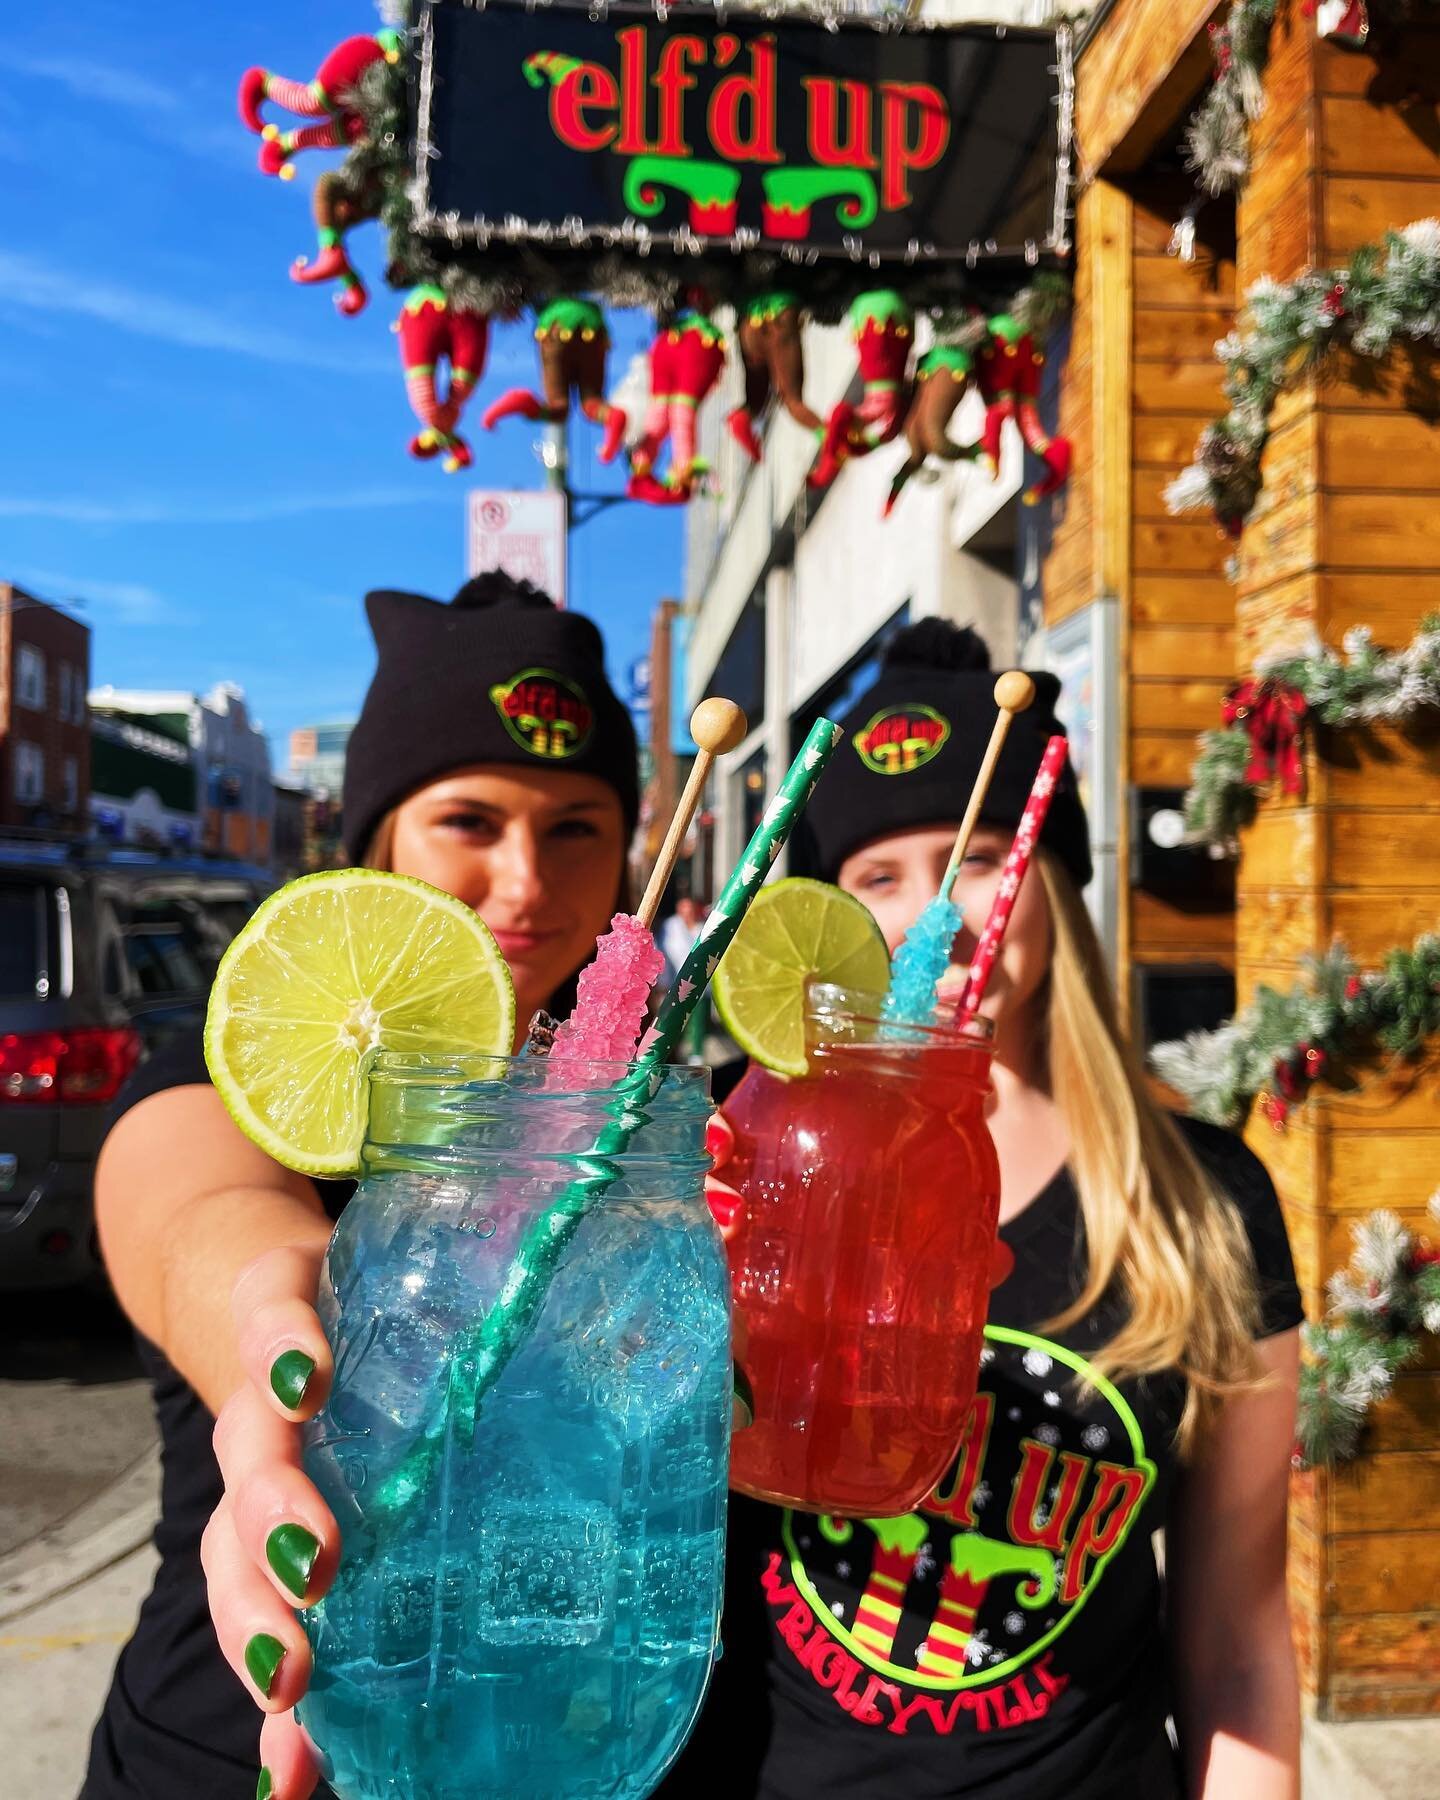 What&rsquo;s your favorite #ElfdUp cocktail? If you haven&rsquo;t tried them all, there&rsquo;s still time! We&rsquo;re #ElfdUp until Jan 8th. 🎄🍹 

#elfdup #wrigleyville #chicago